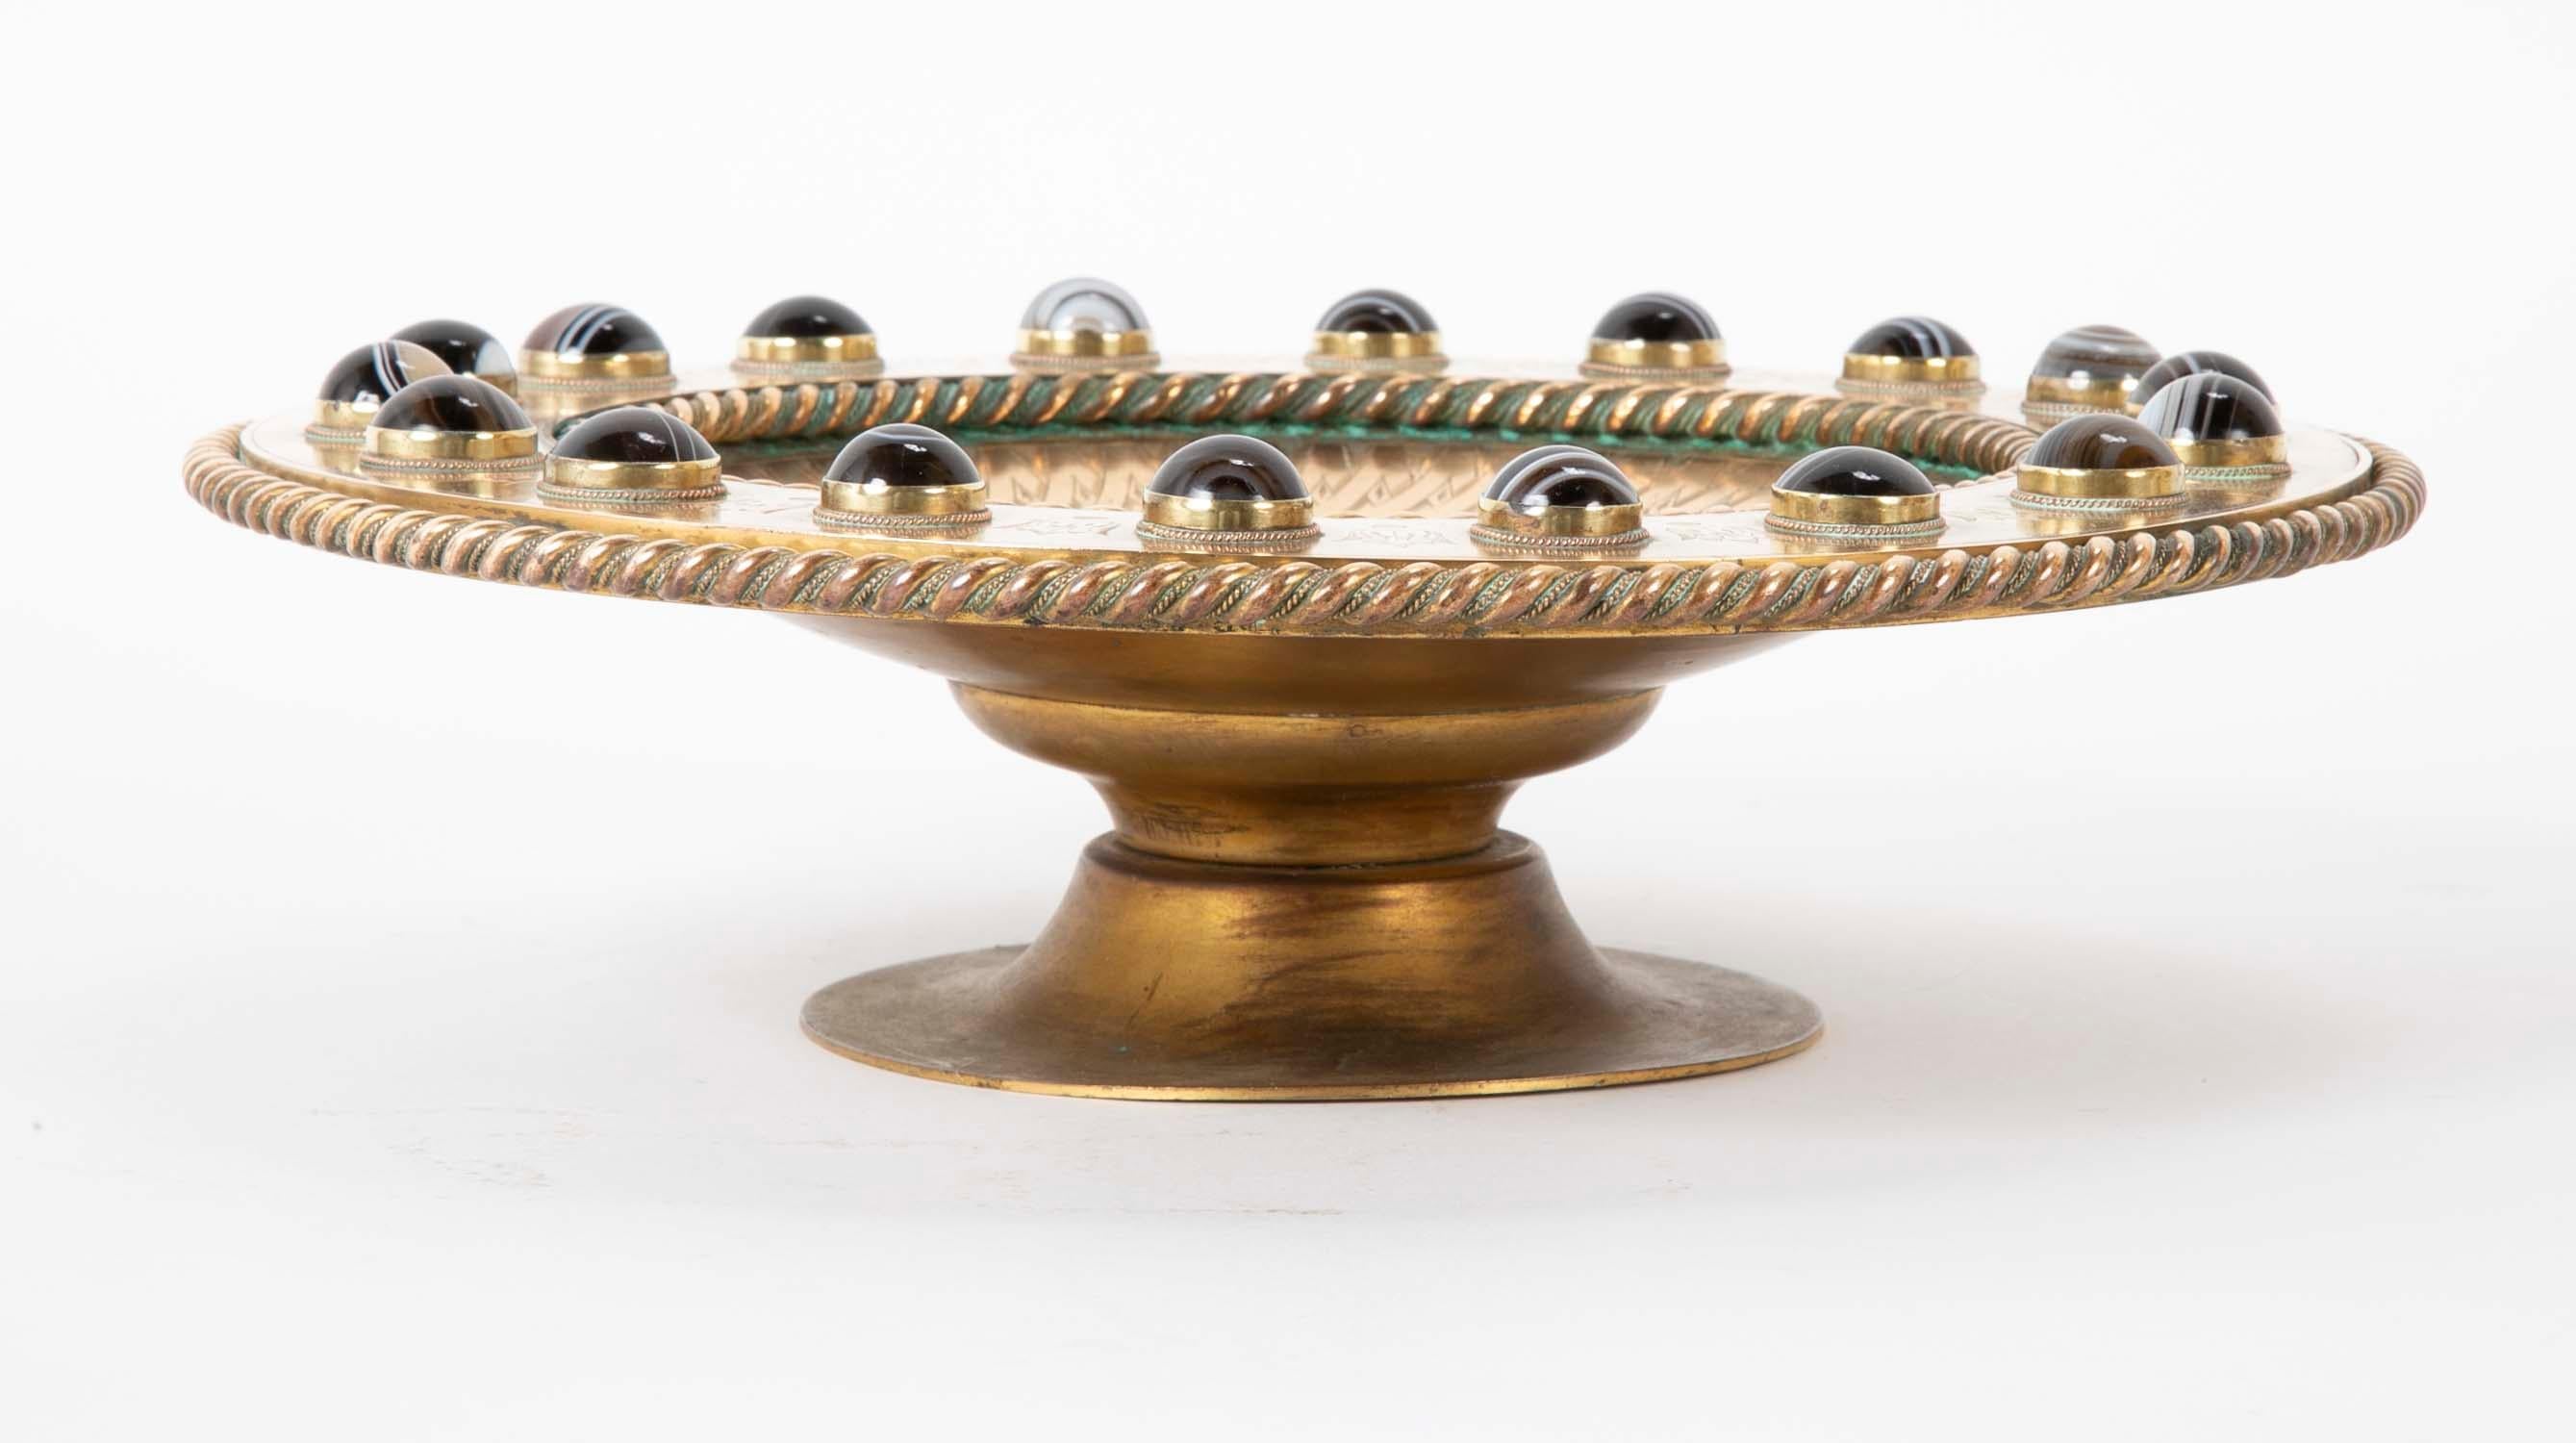 An English or Scottish polished bronze footed tazza with eighteen banded Scottish agate cabochons bezel set at the wide rim. The fabulous shallow-footed bowl has an incised overlapping detail at the top rim of the bowl and braided edges at the wide